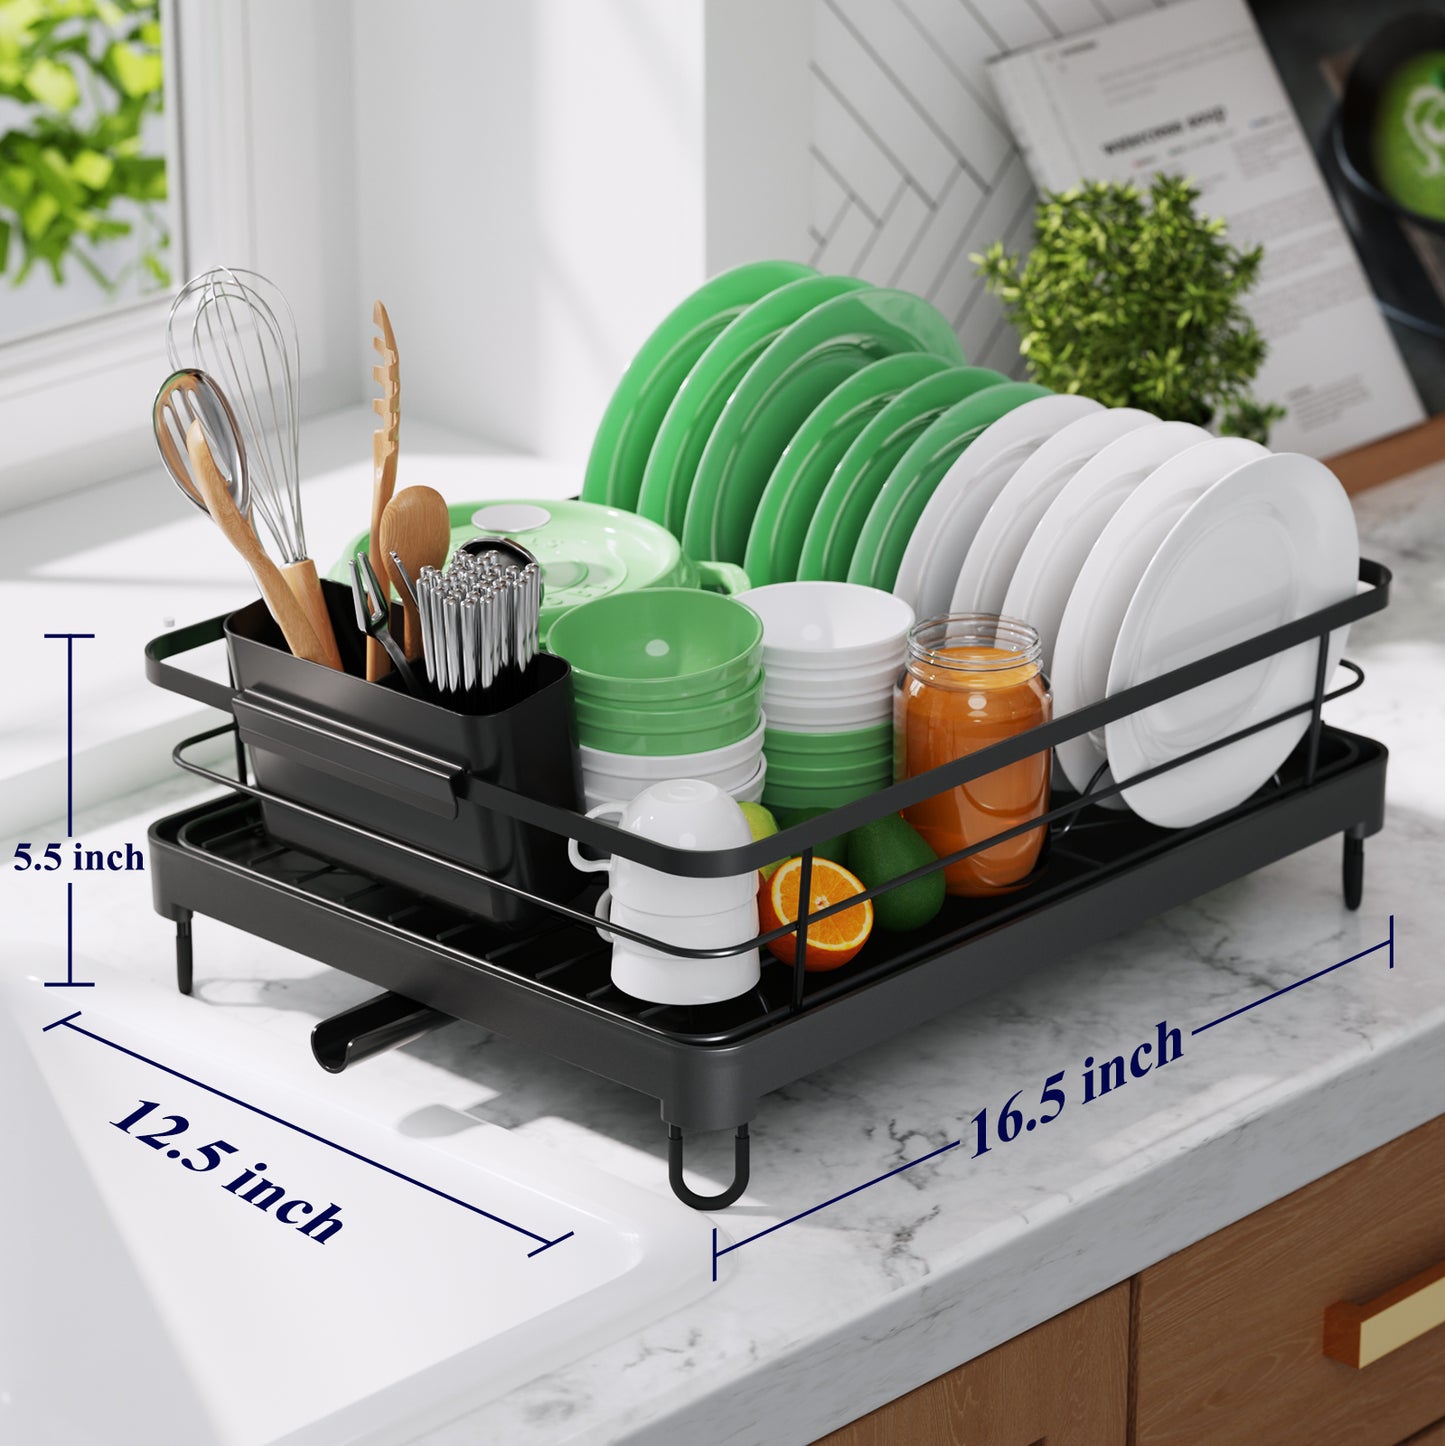 Cutlery Holder with Utensil Holder, Dish Drying Rack, Space Saving